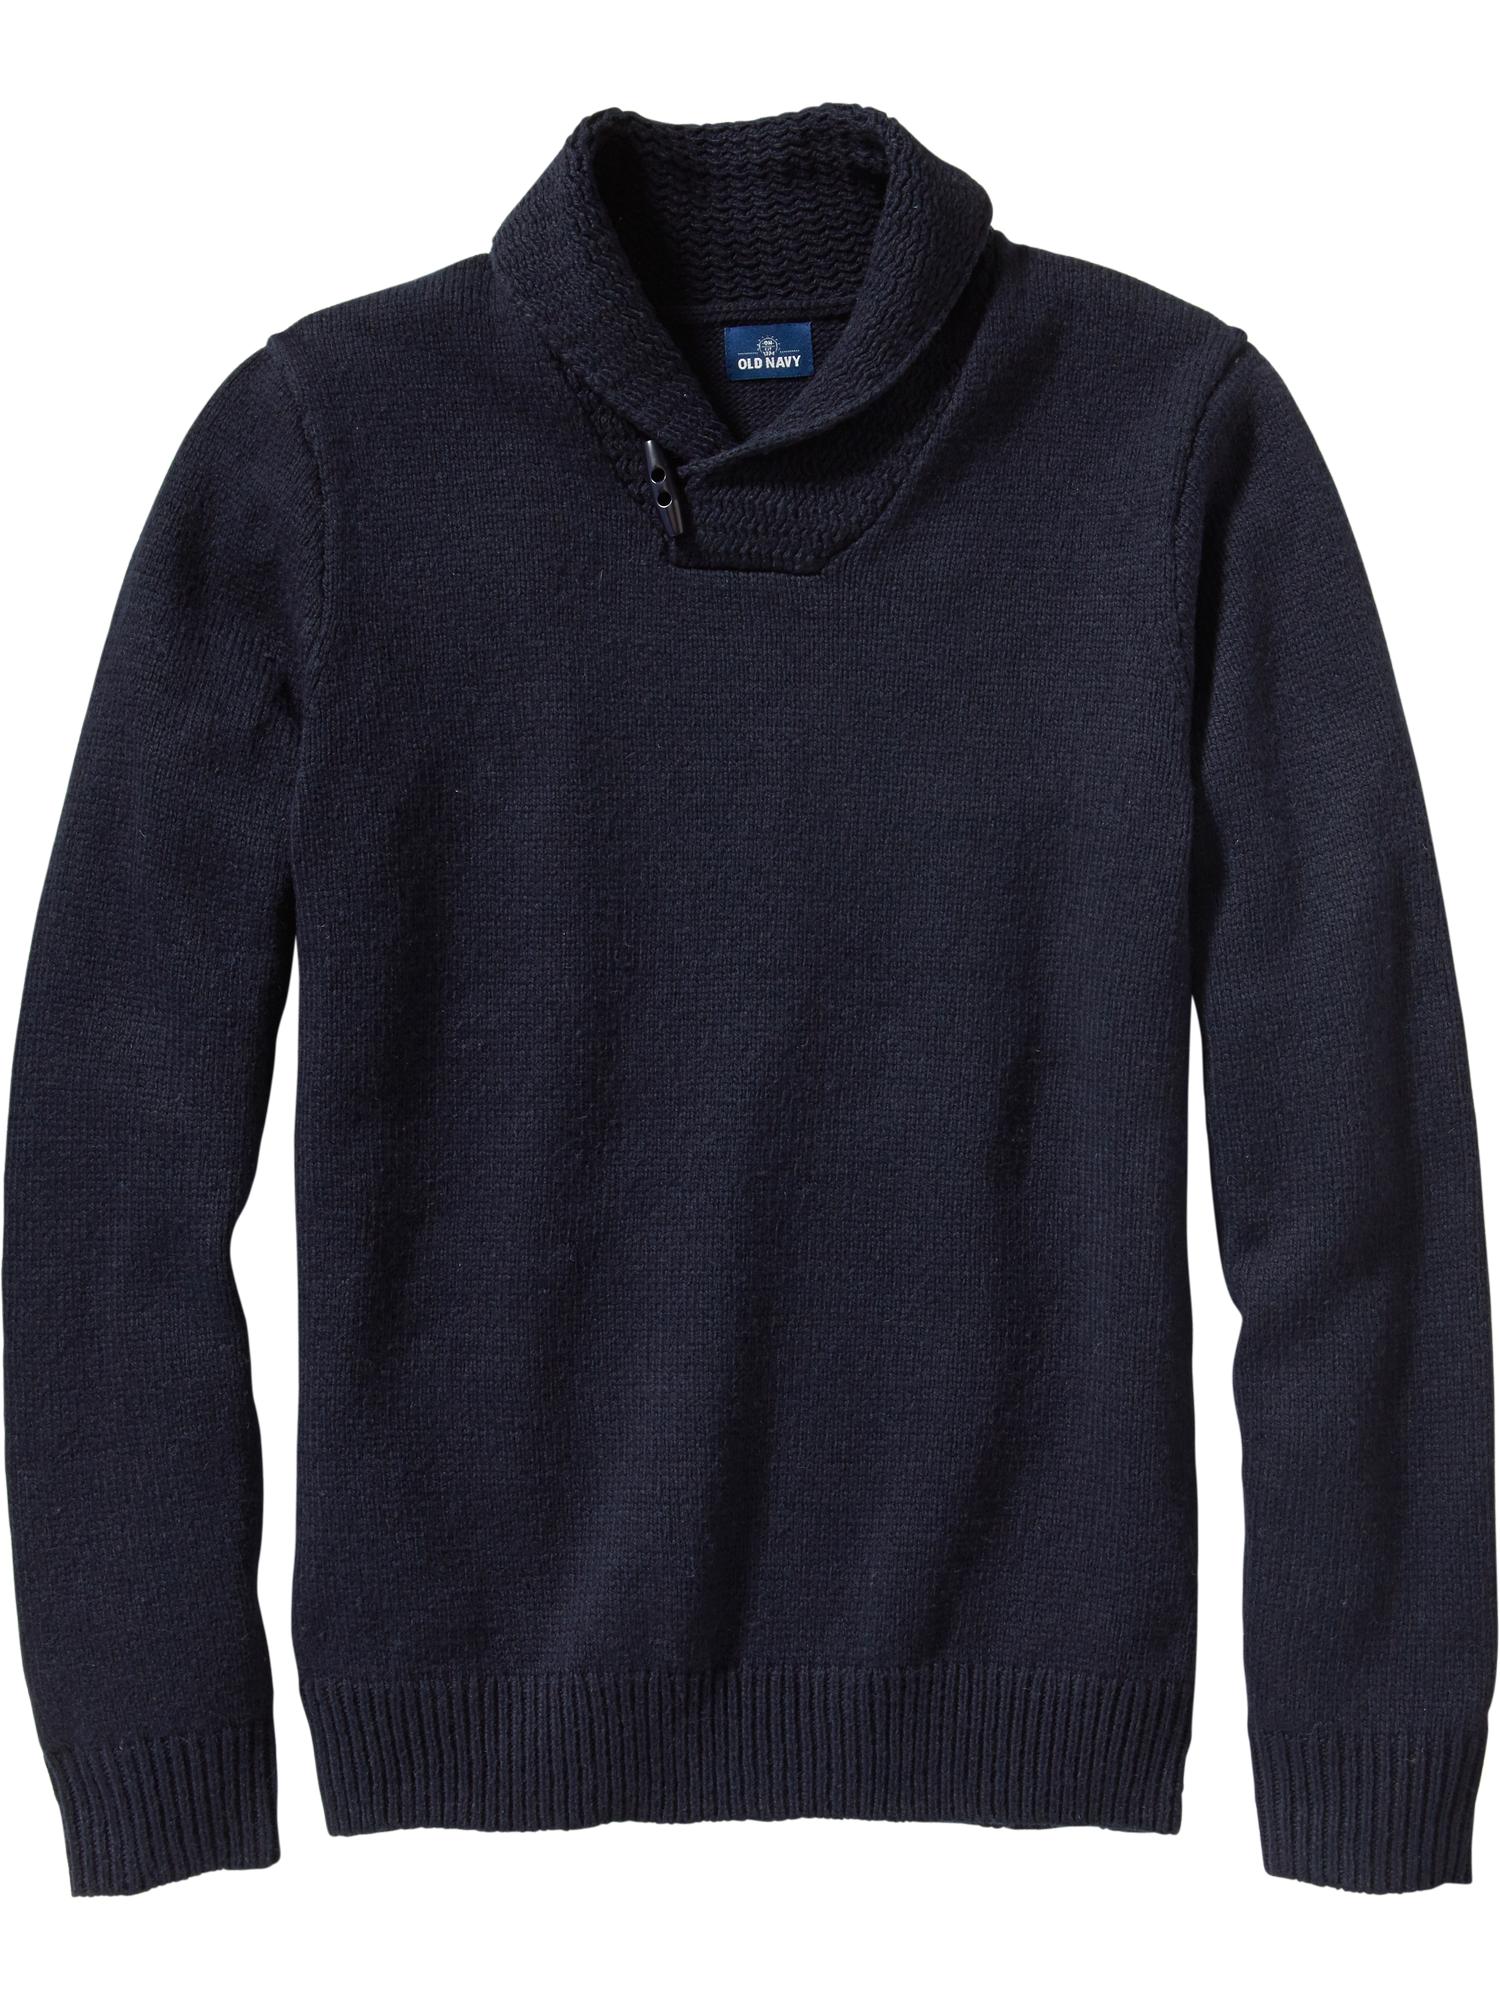 Men's Shawl-Collar Sweaters | Old Navy